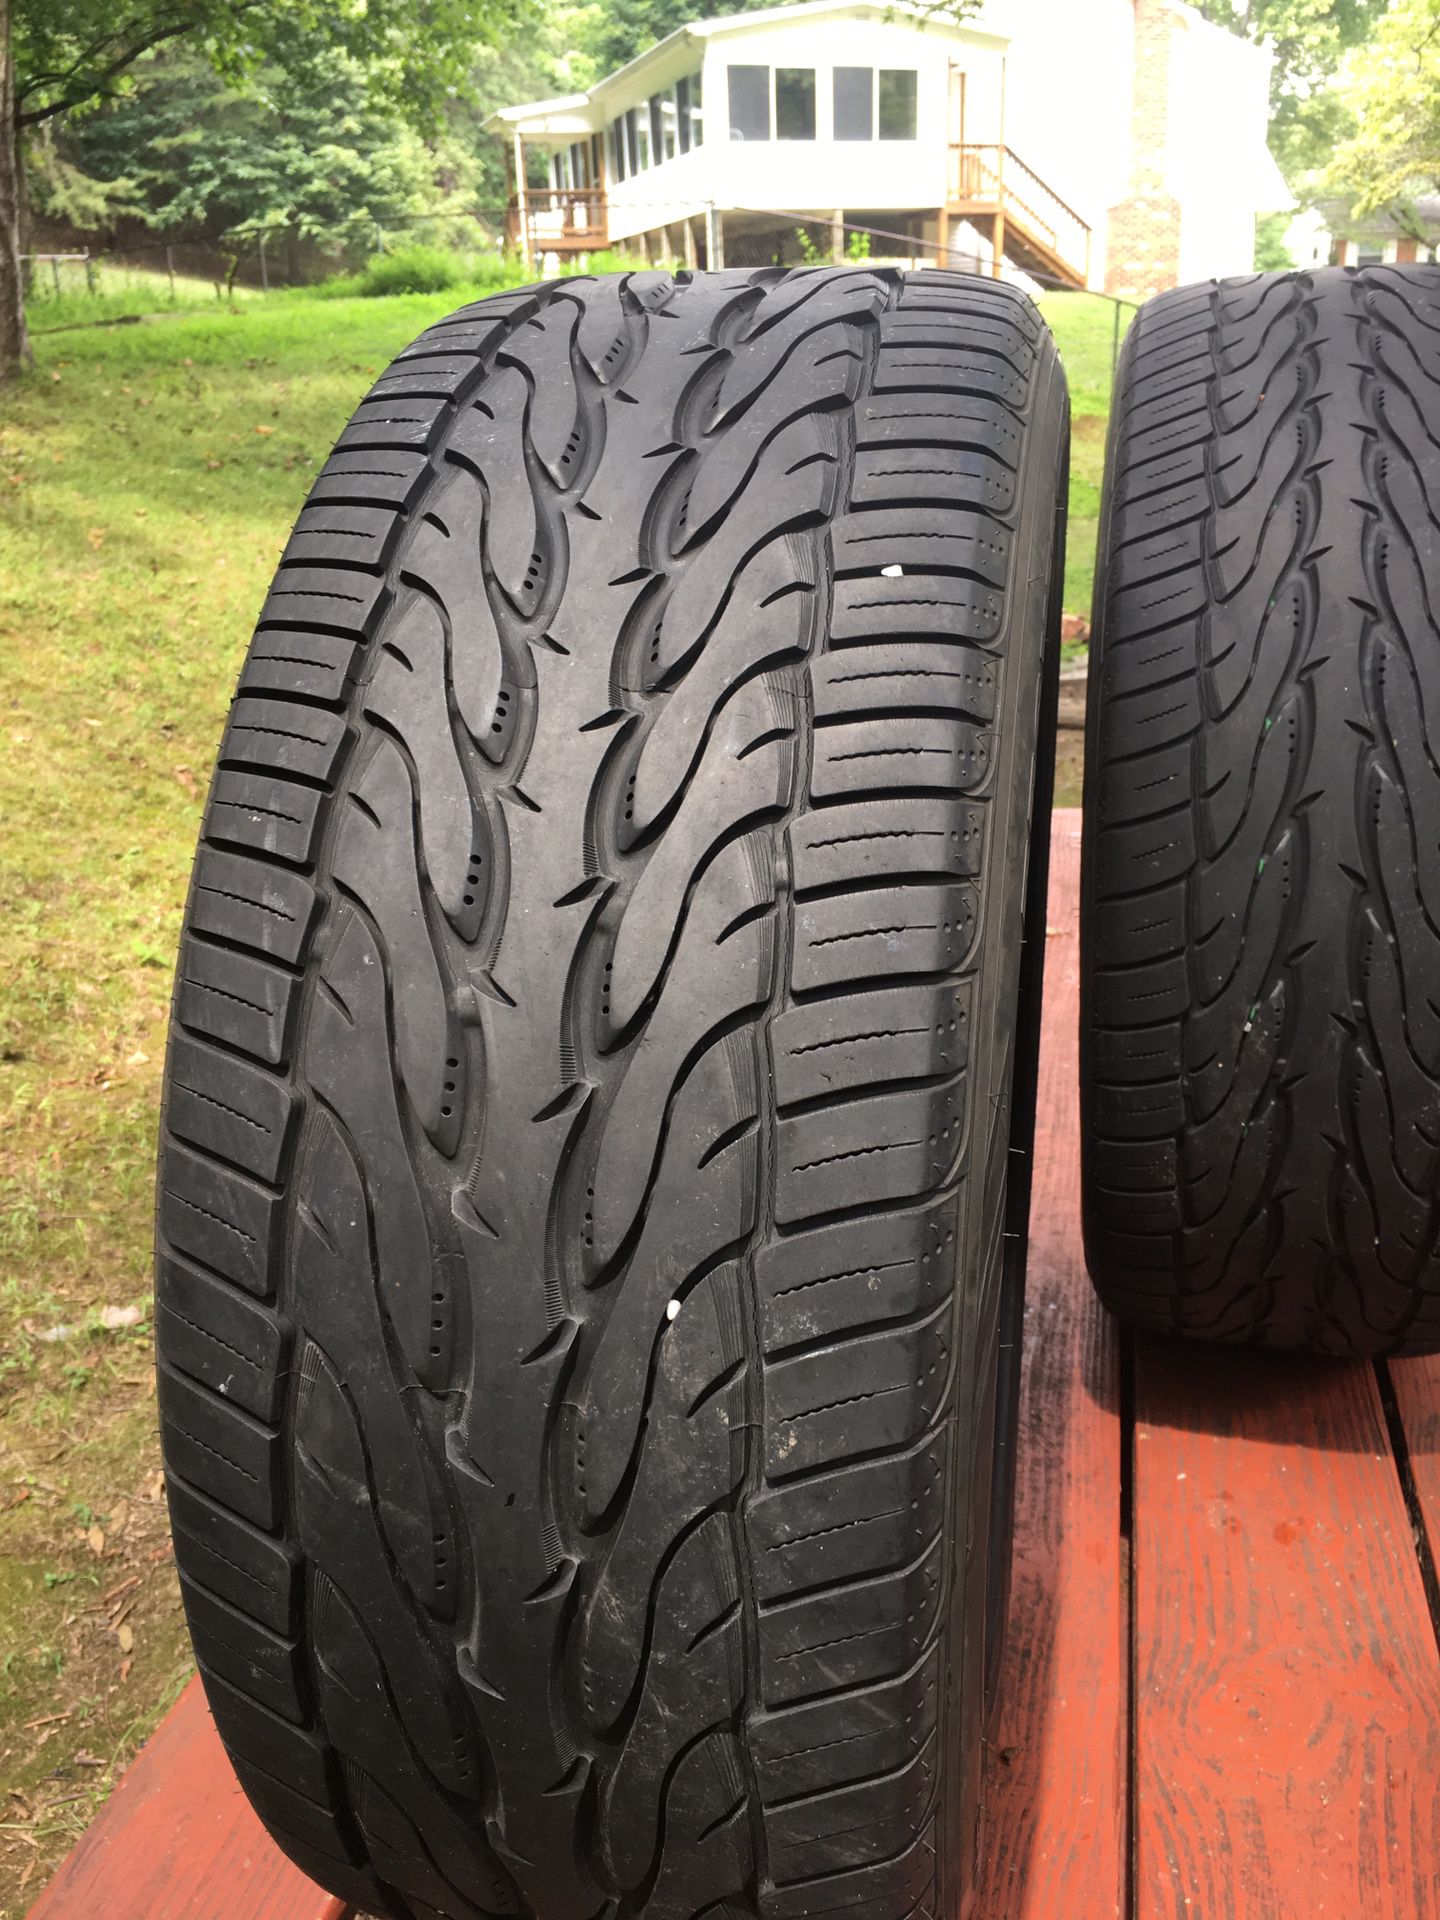 Tires for sale 22”